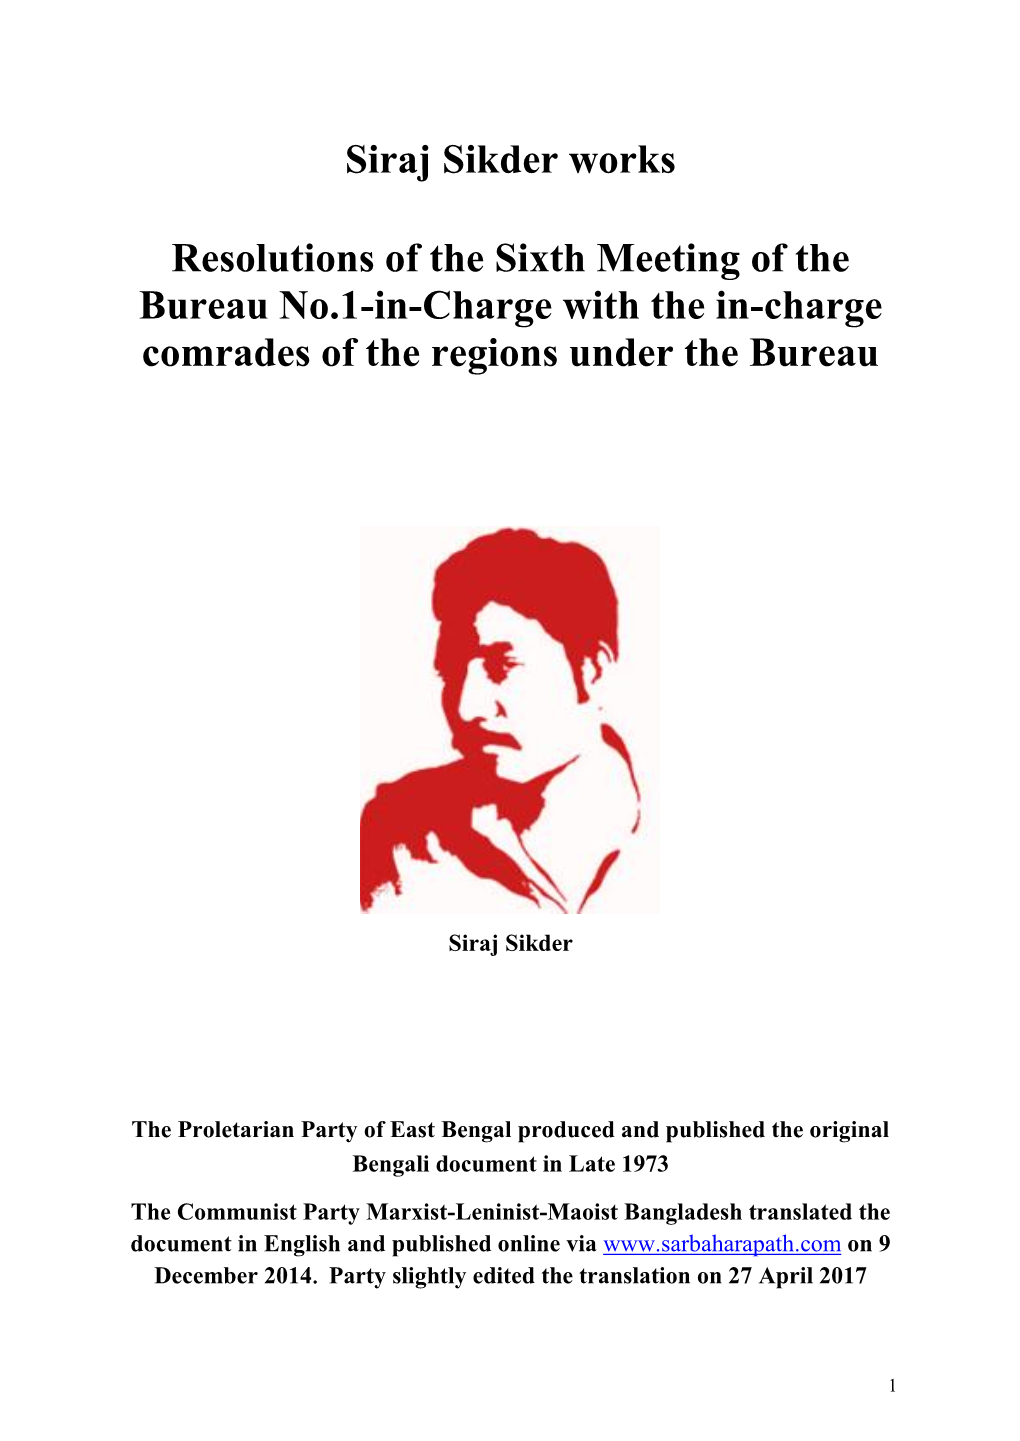 Siraj Sikder Works Resolutions of the Sixth Meeting of the Bureau No